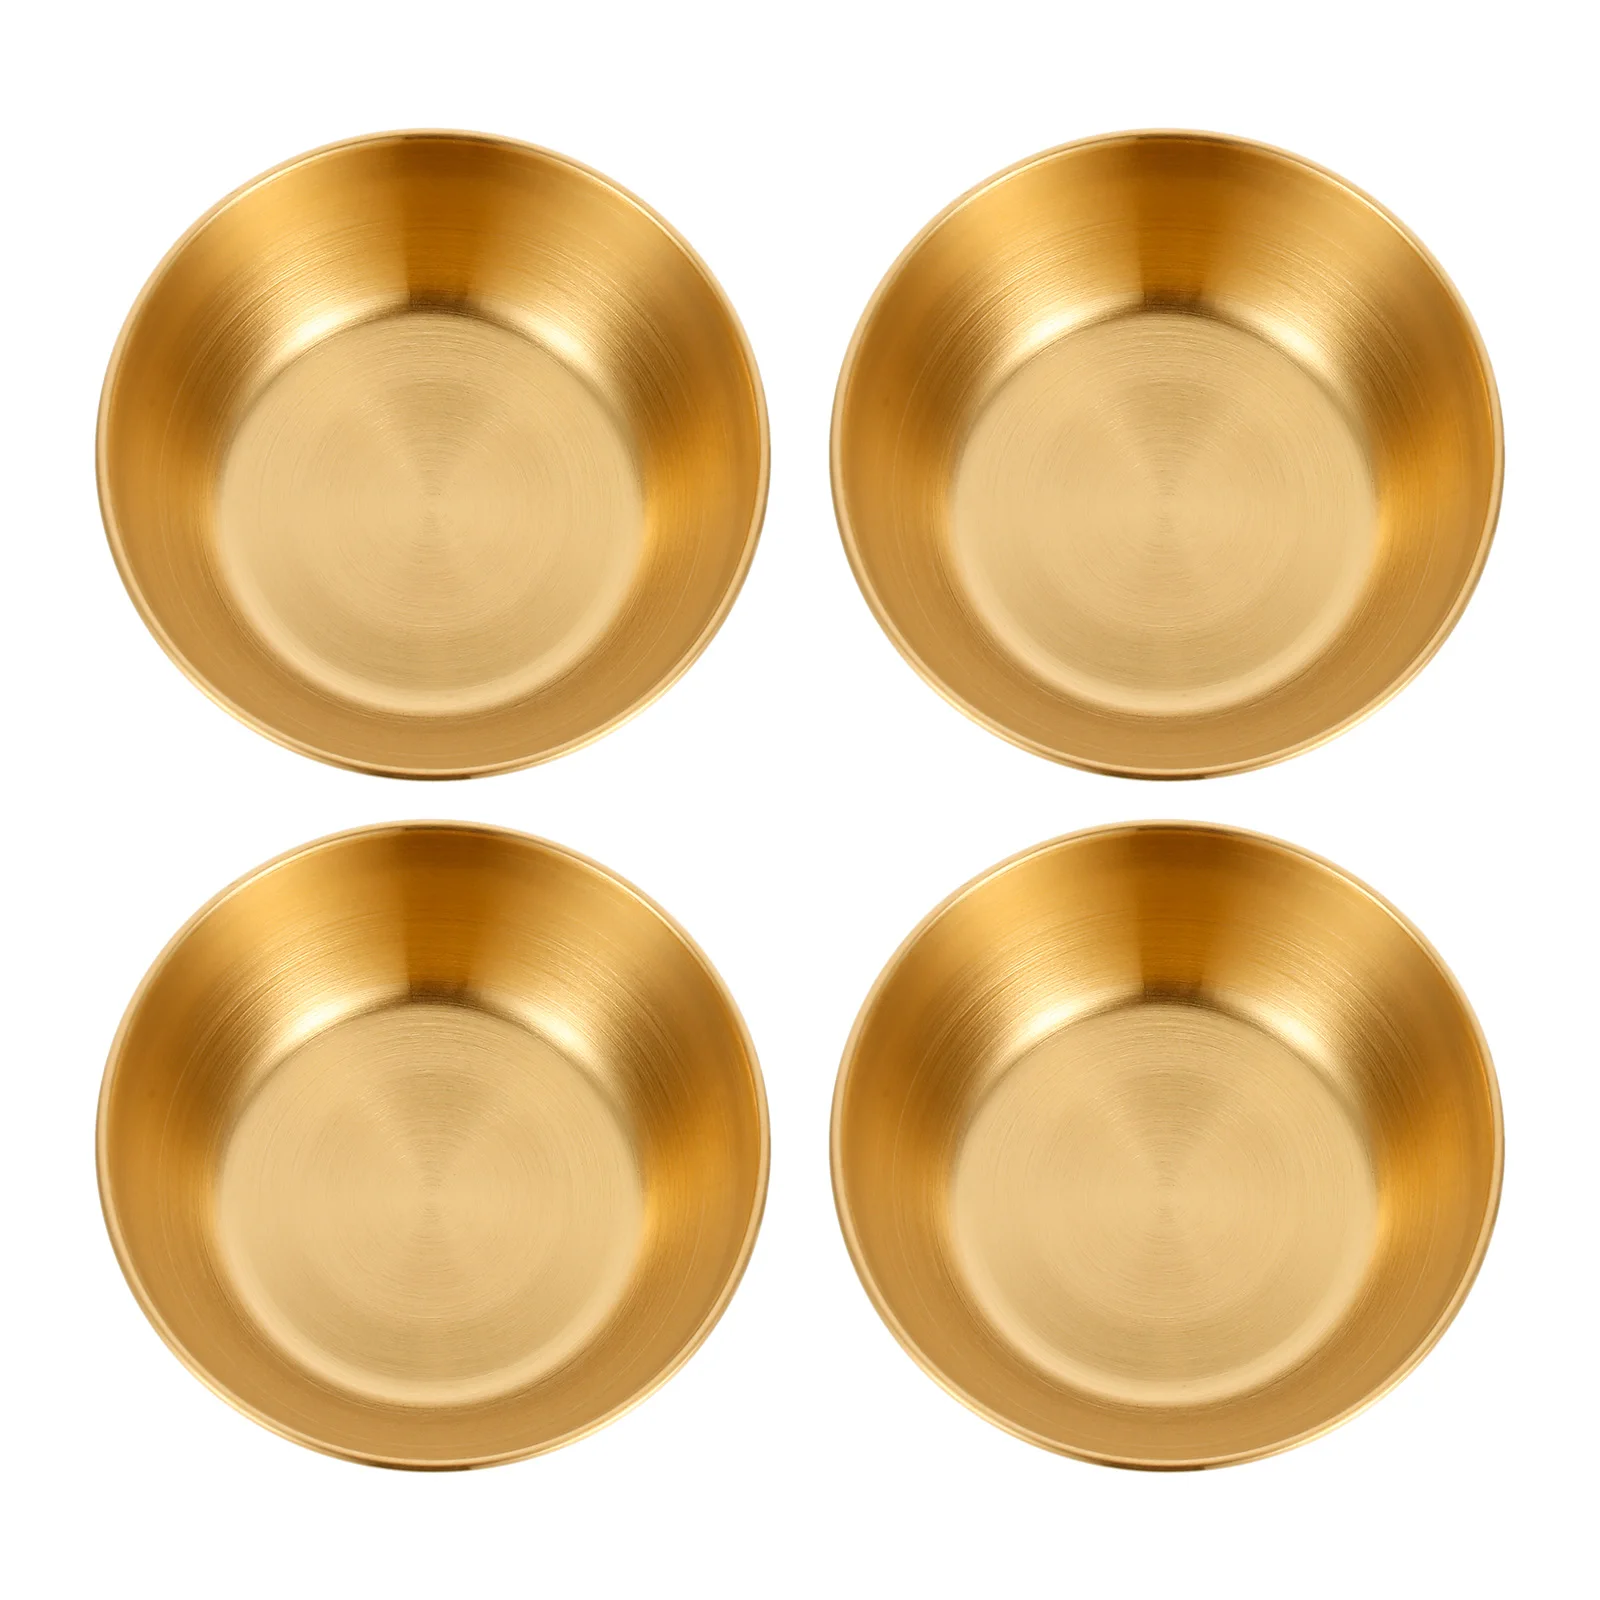 

4pcs Stainless Steel Golden Sauce Dishes Appetizer Seasoning Serving Dishes Sets Tray Spice Plates Kitchen Tableware